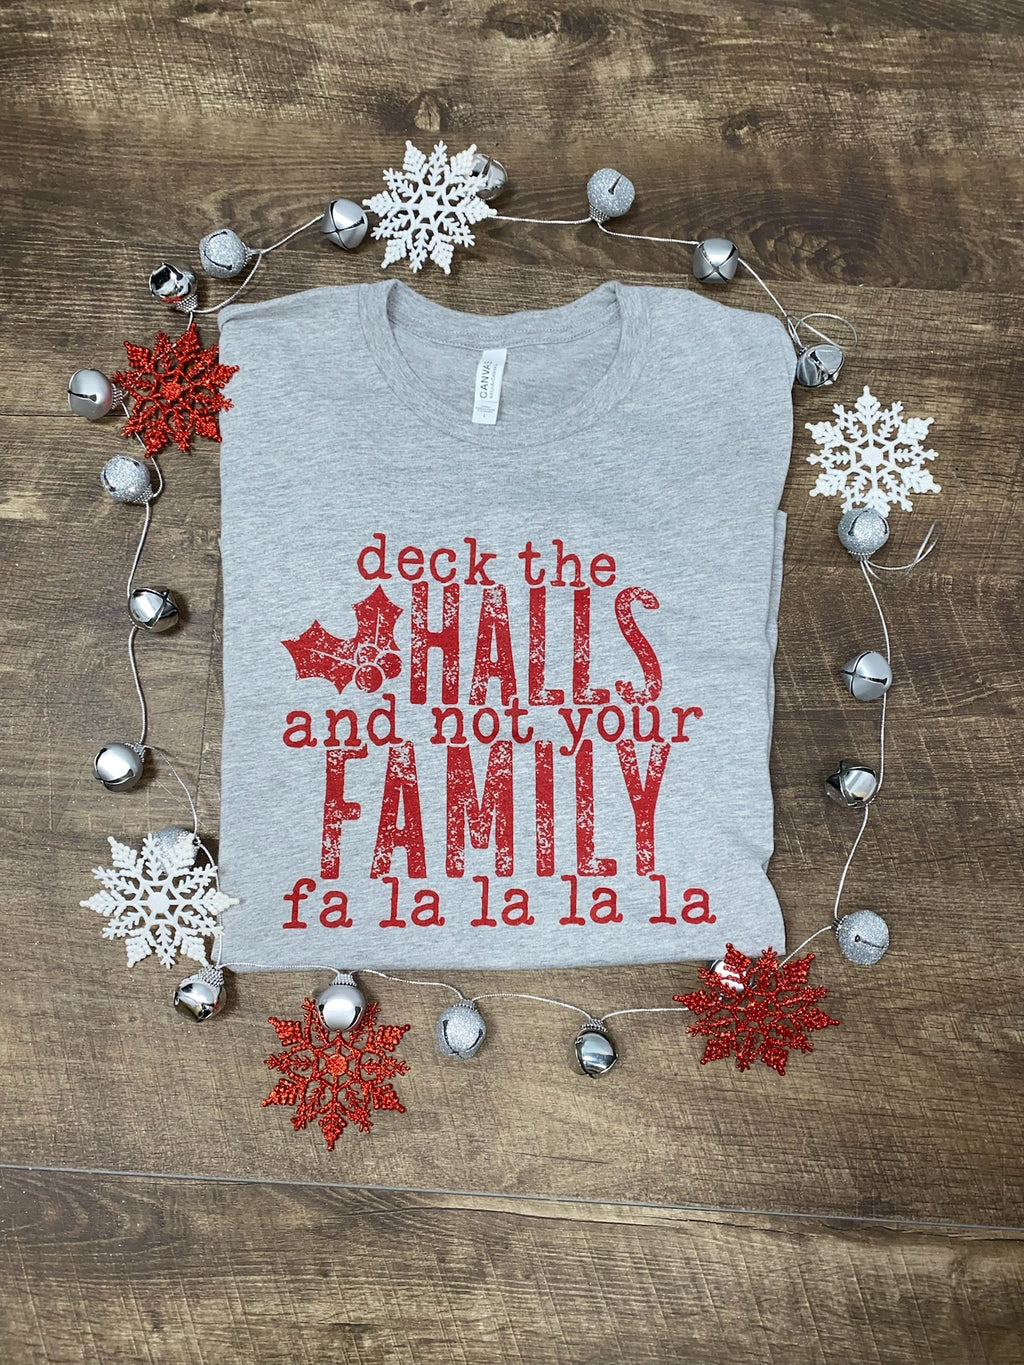 Deck the halls: Holiday decorating is reaching new heights - The Hustle